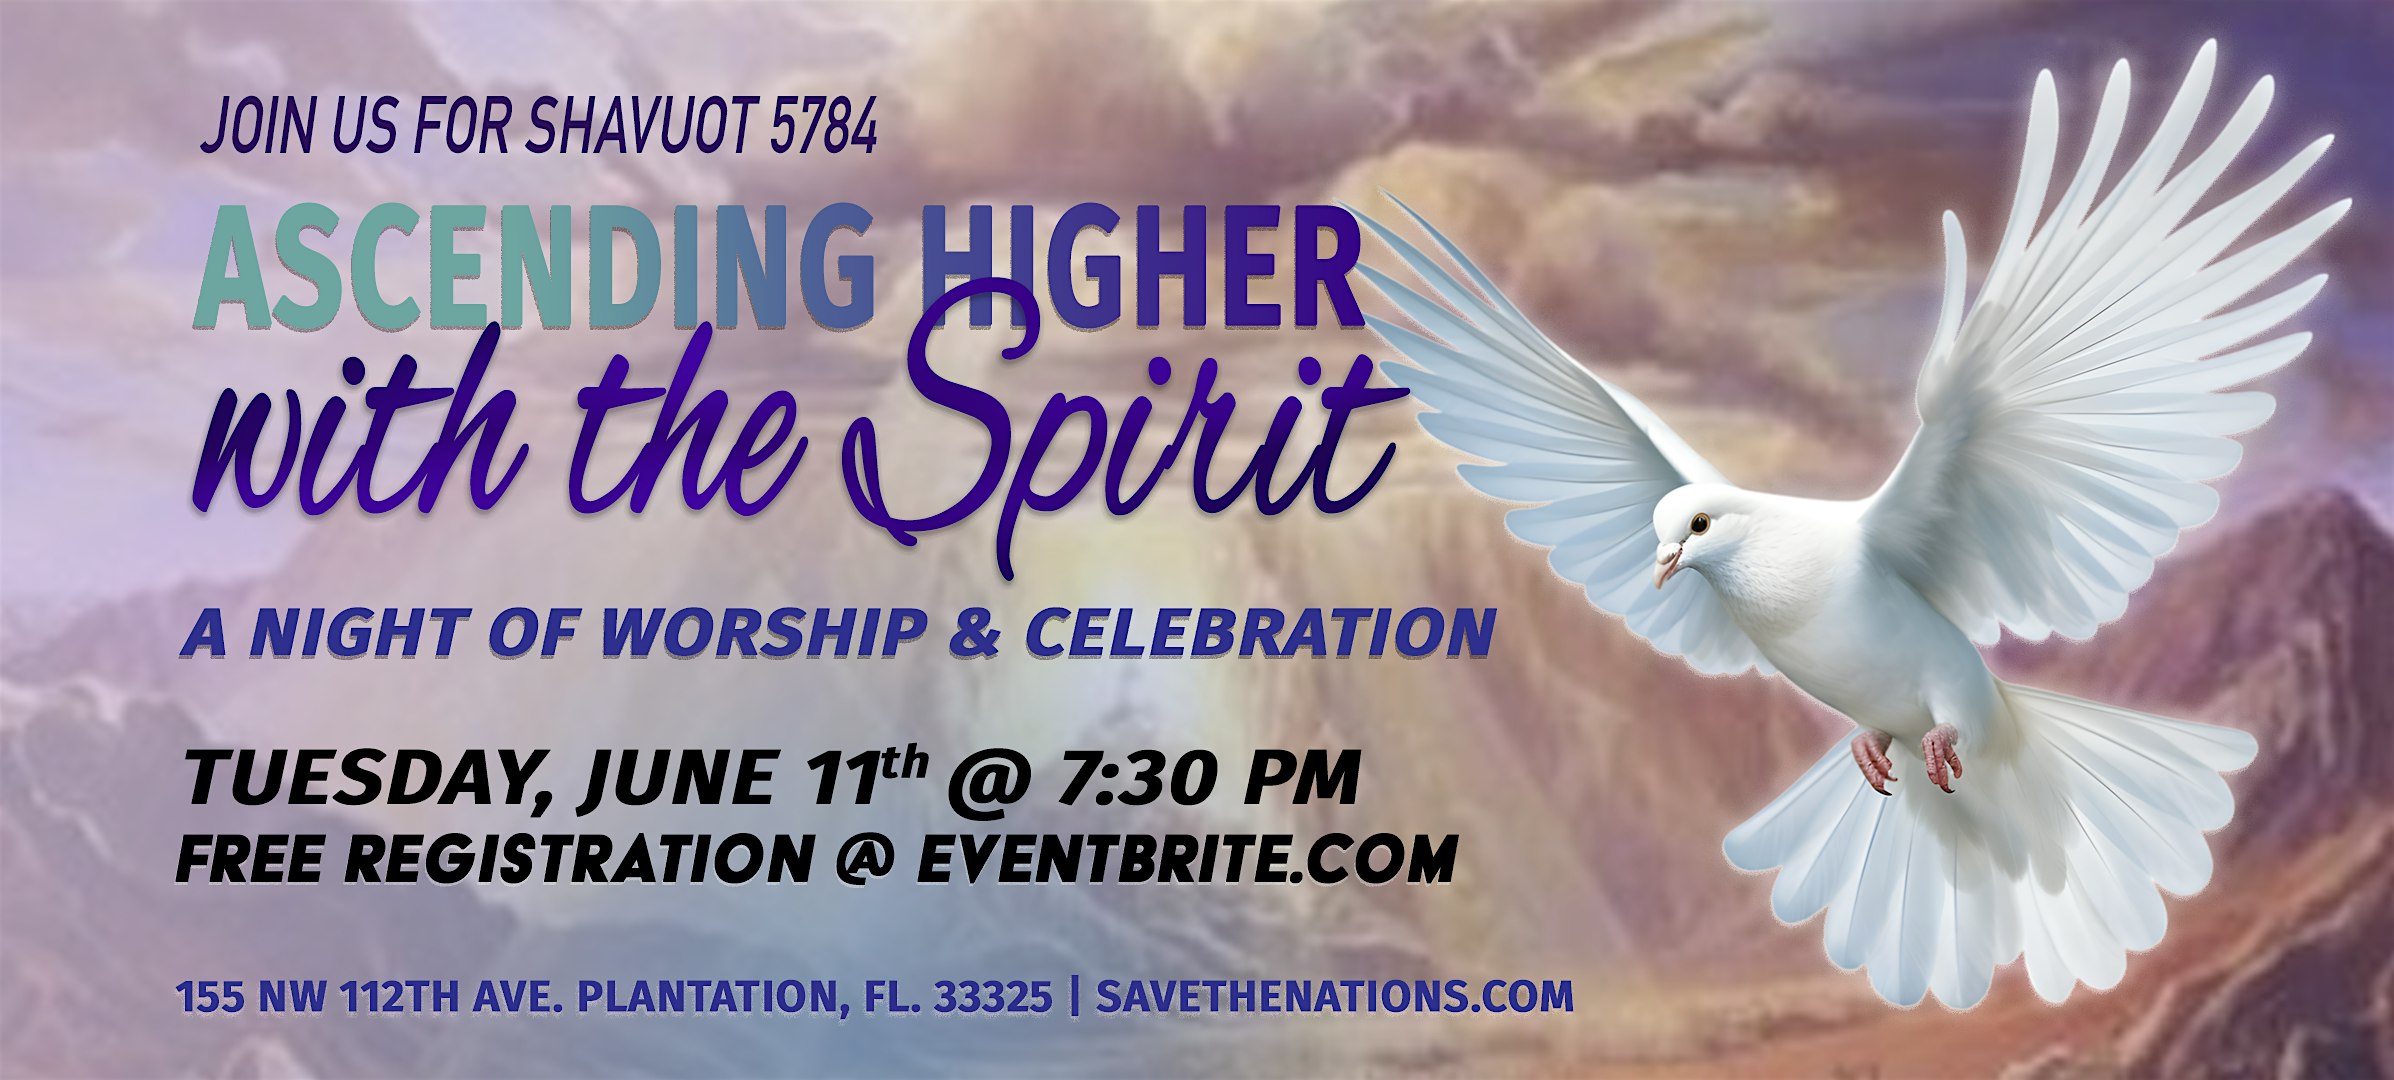 Ascending Higher with the Spirit (Shavuot 5784)